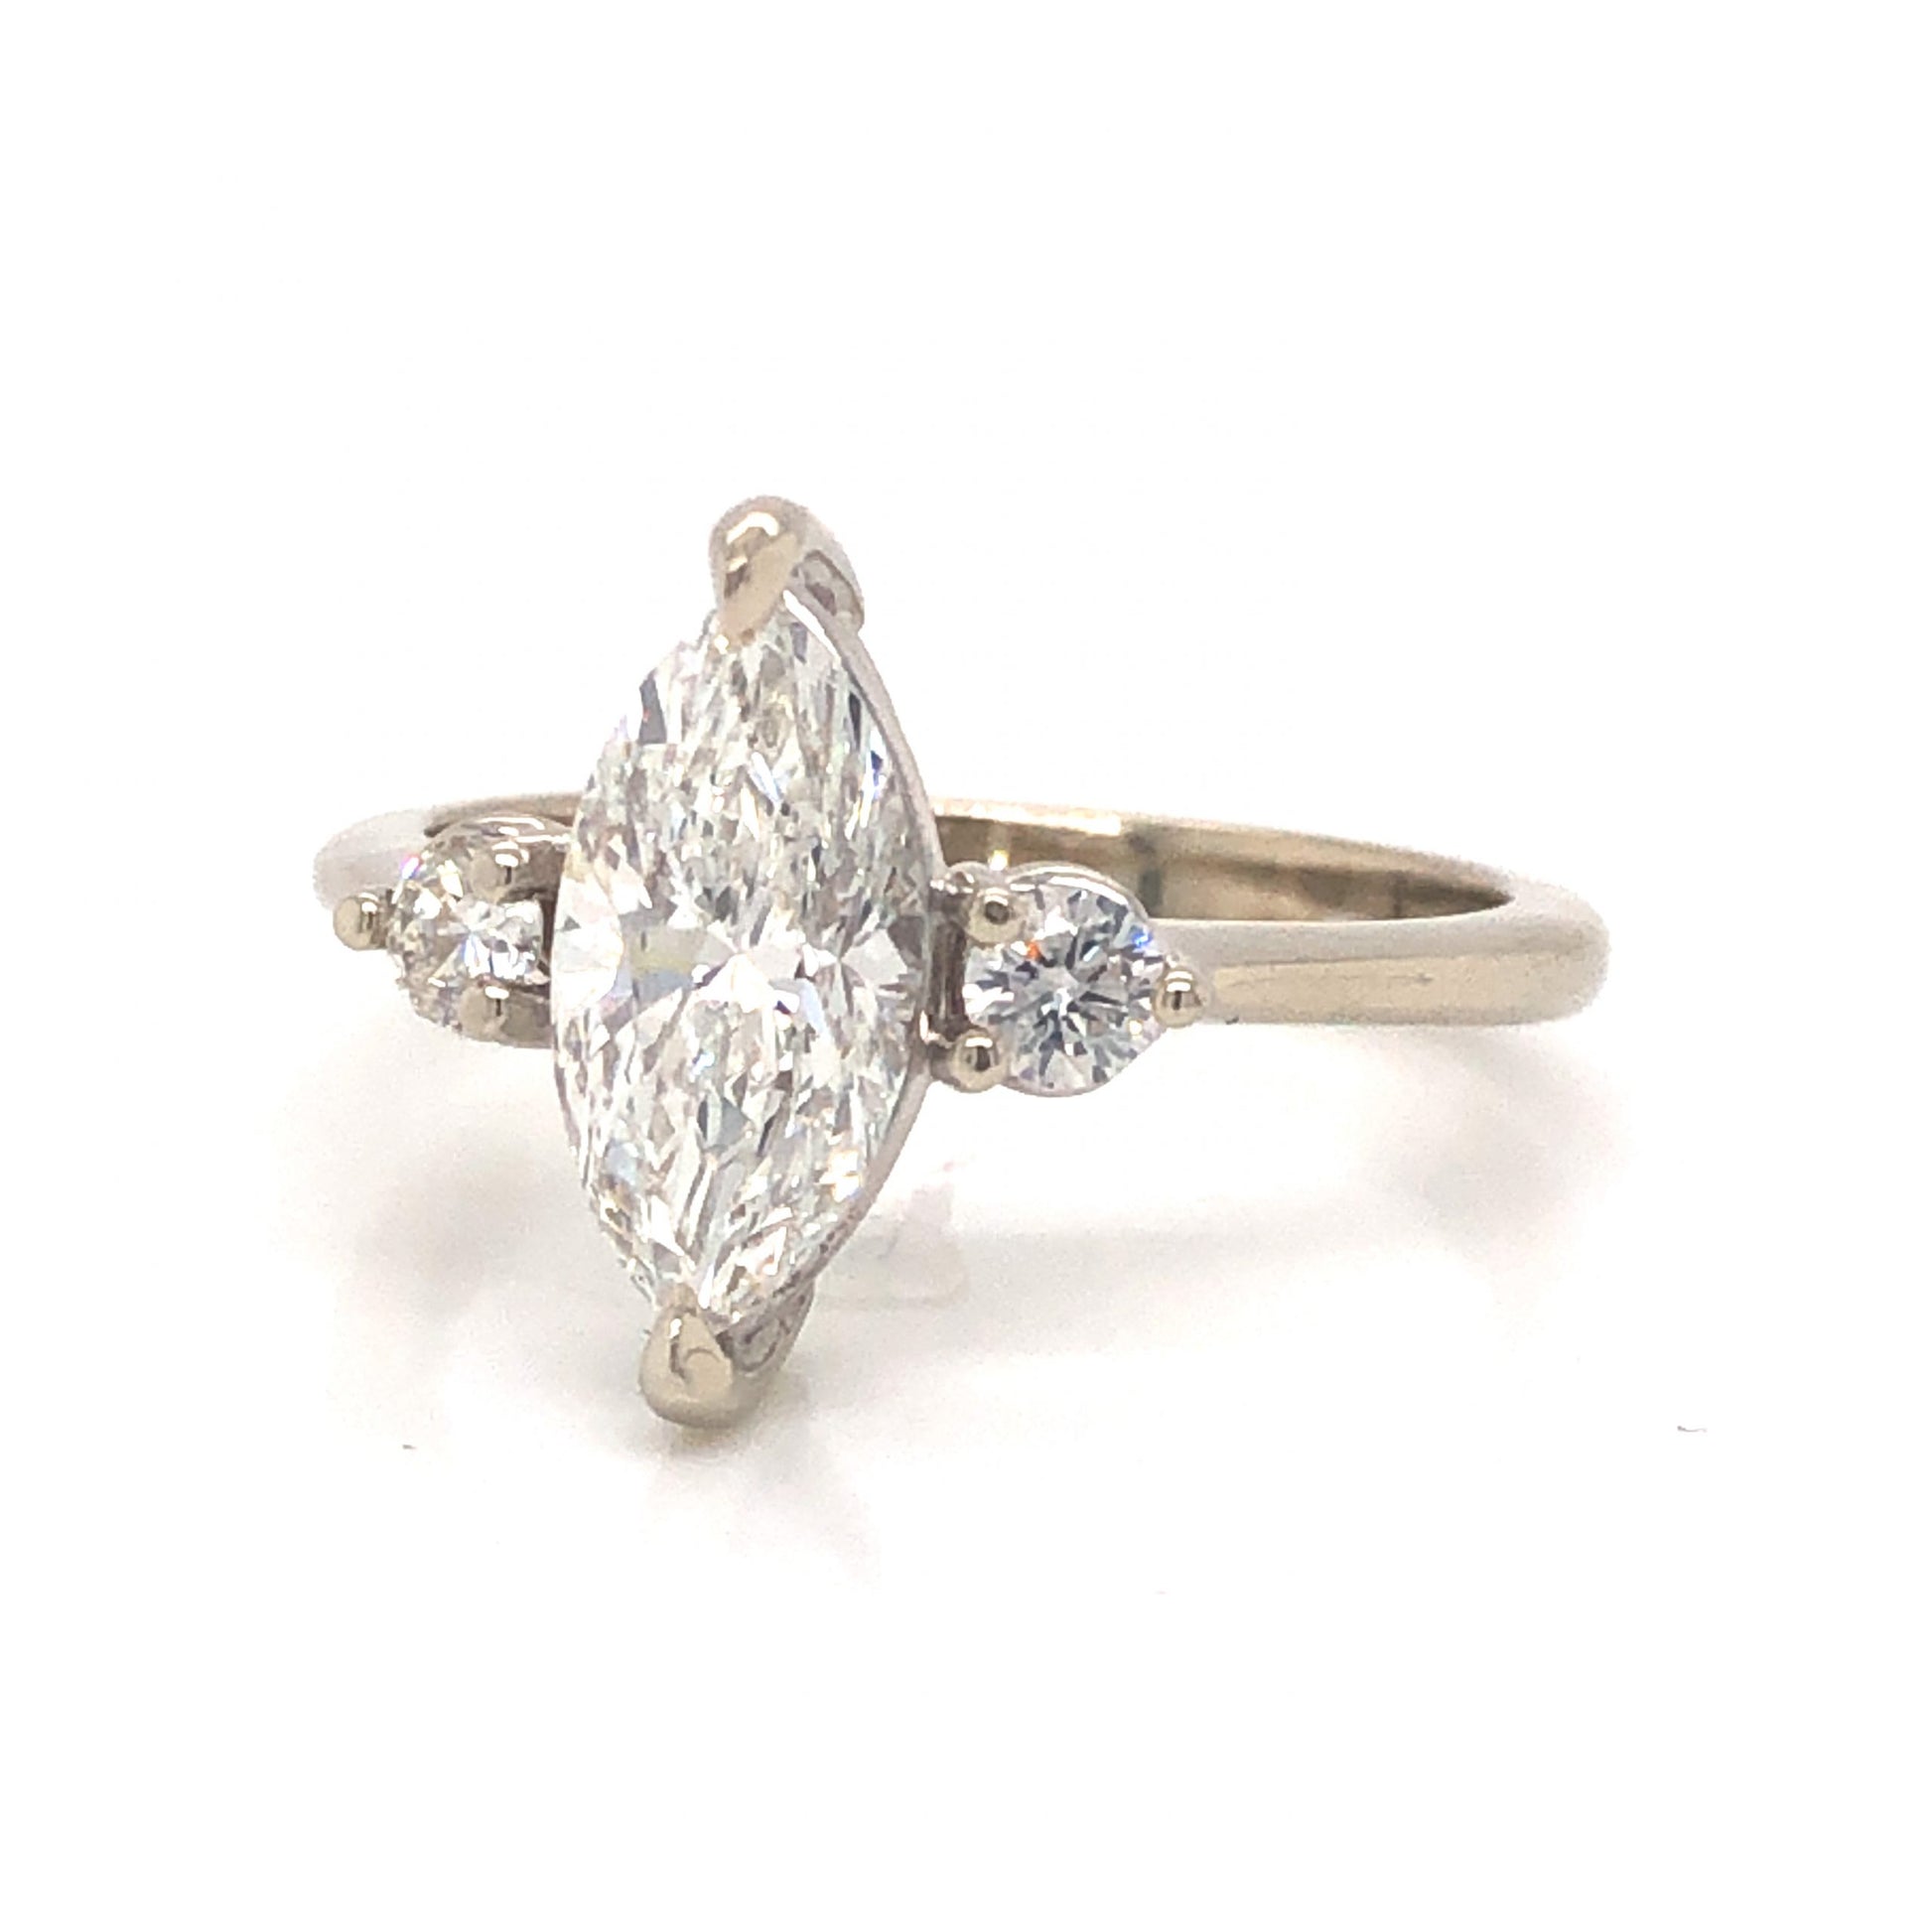 1.30 Marquise Diamond Engagement Ring in 14k White GoldComposition: Platinum Ring Size: 6.75 Total Diamond Weight: 1.50ct Total Gram Weight: 3.6 g Inscription: 14k
      